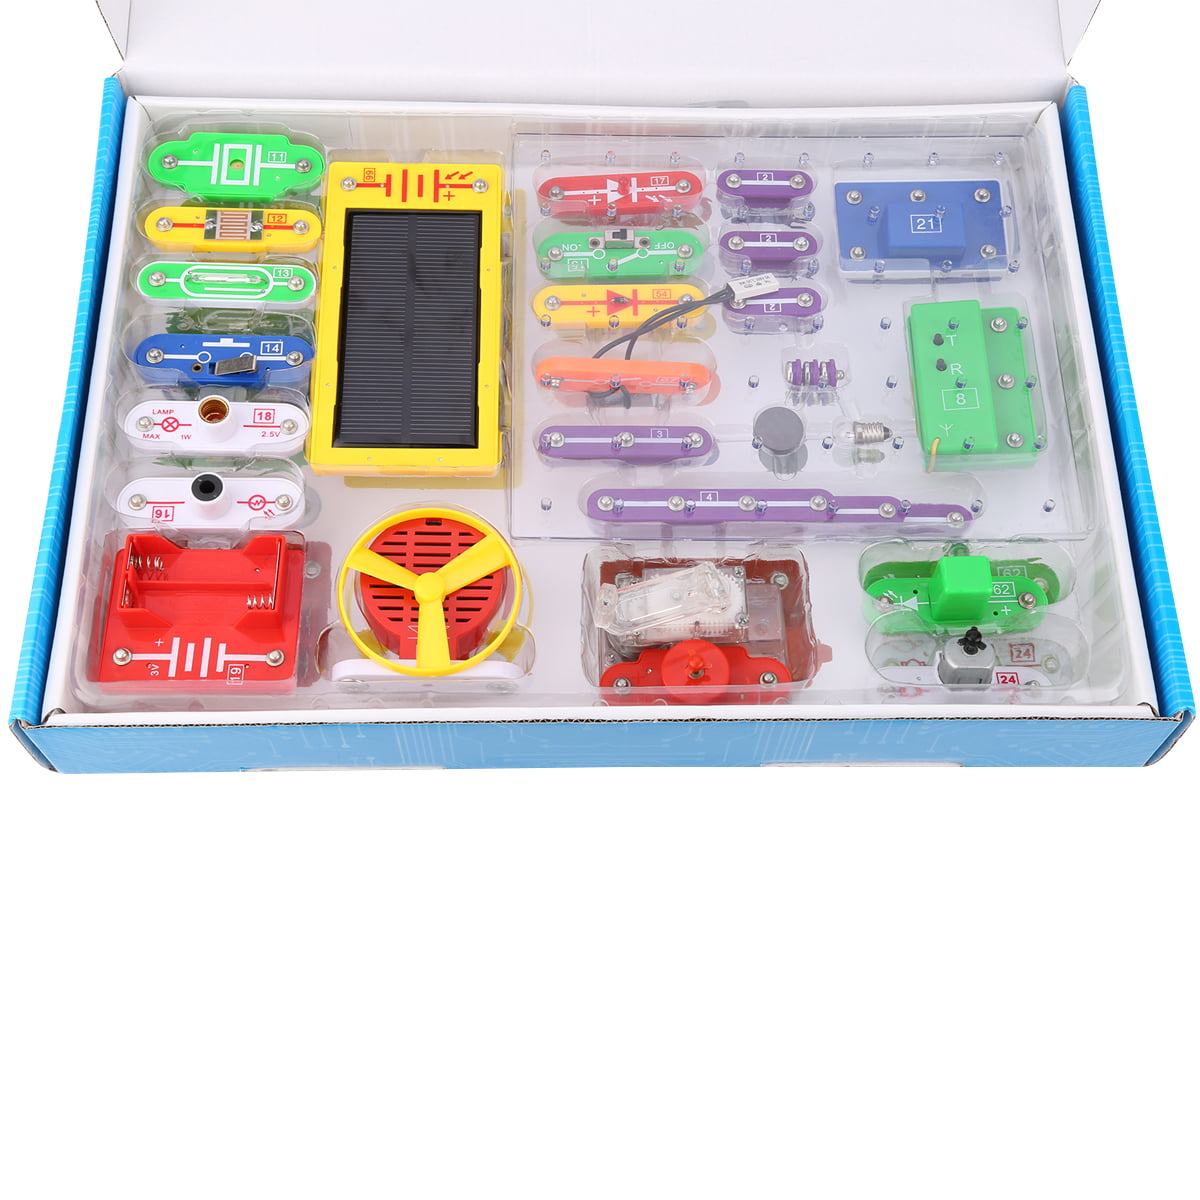 Circuits For Kids #688 Electronics Discovery Kit Experiments Smart Block Science 